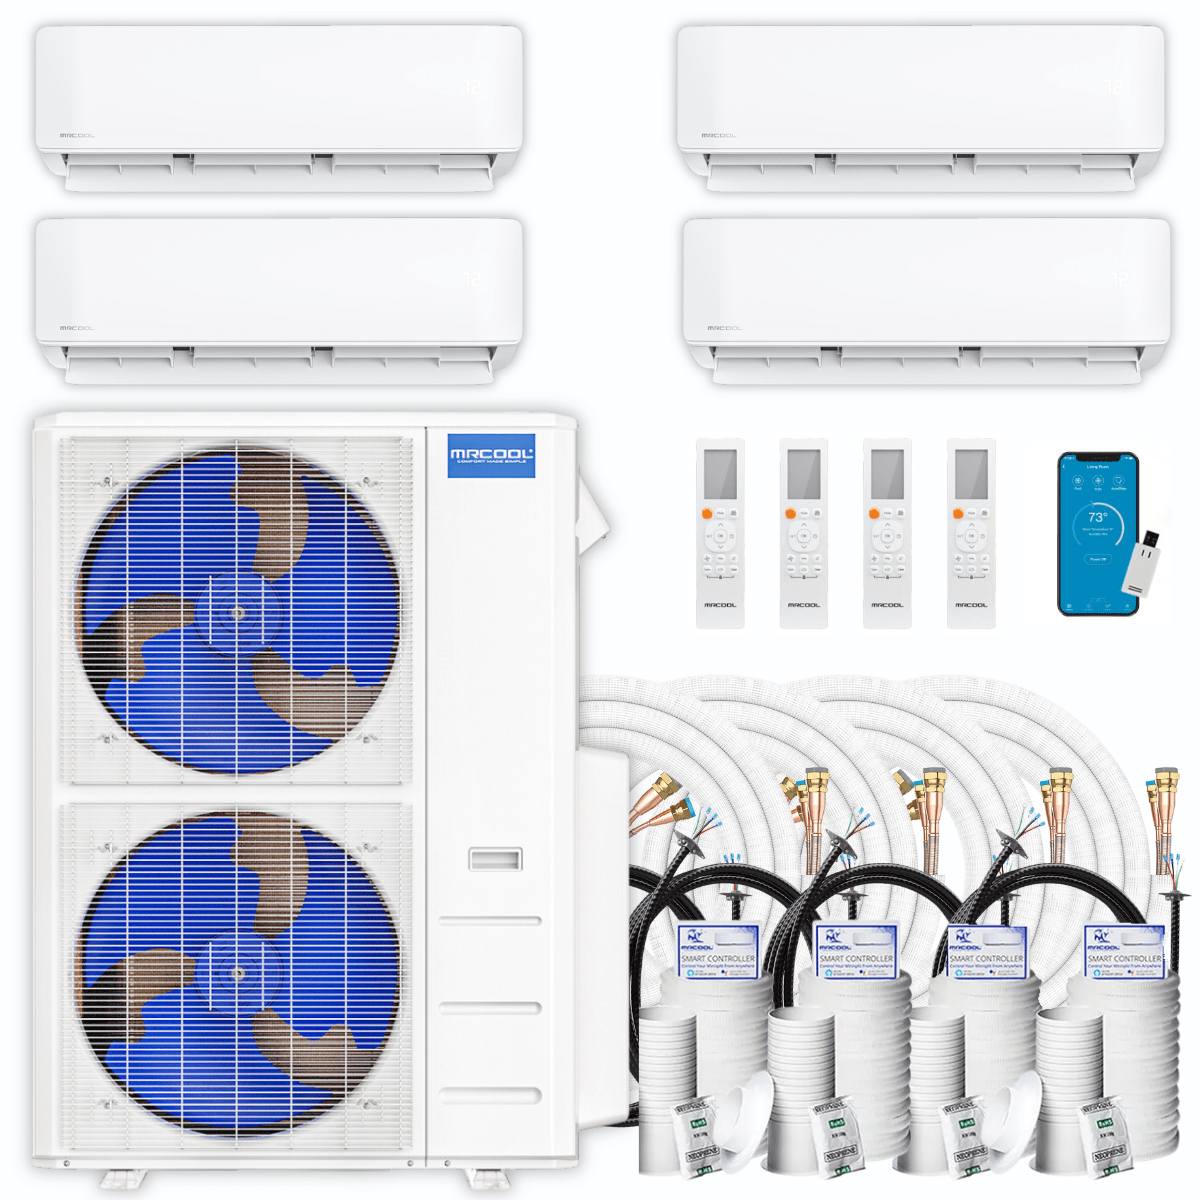 MRCOOL MRCOOL DIY Mini Split - 42,000 BTU 4 Zone Ductless Air Conditioner and Heat Pump with 50 ft. Install Kit, DIYM448HPW02C194 Mini Split DIYM448HPW02C194